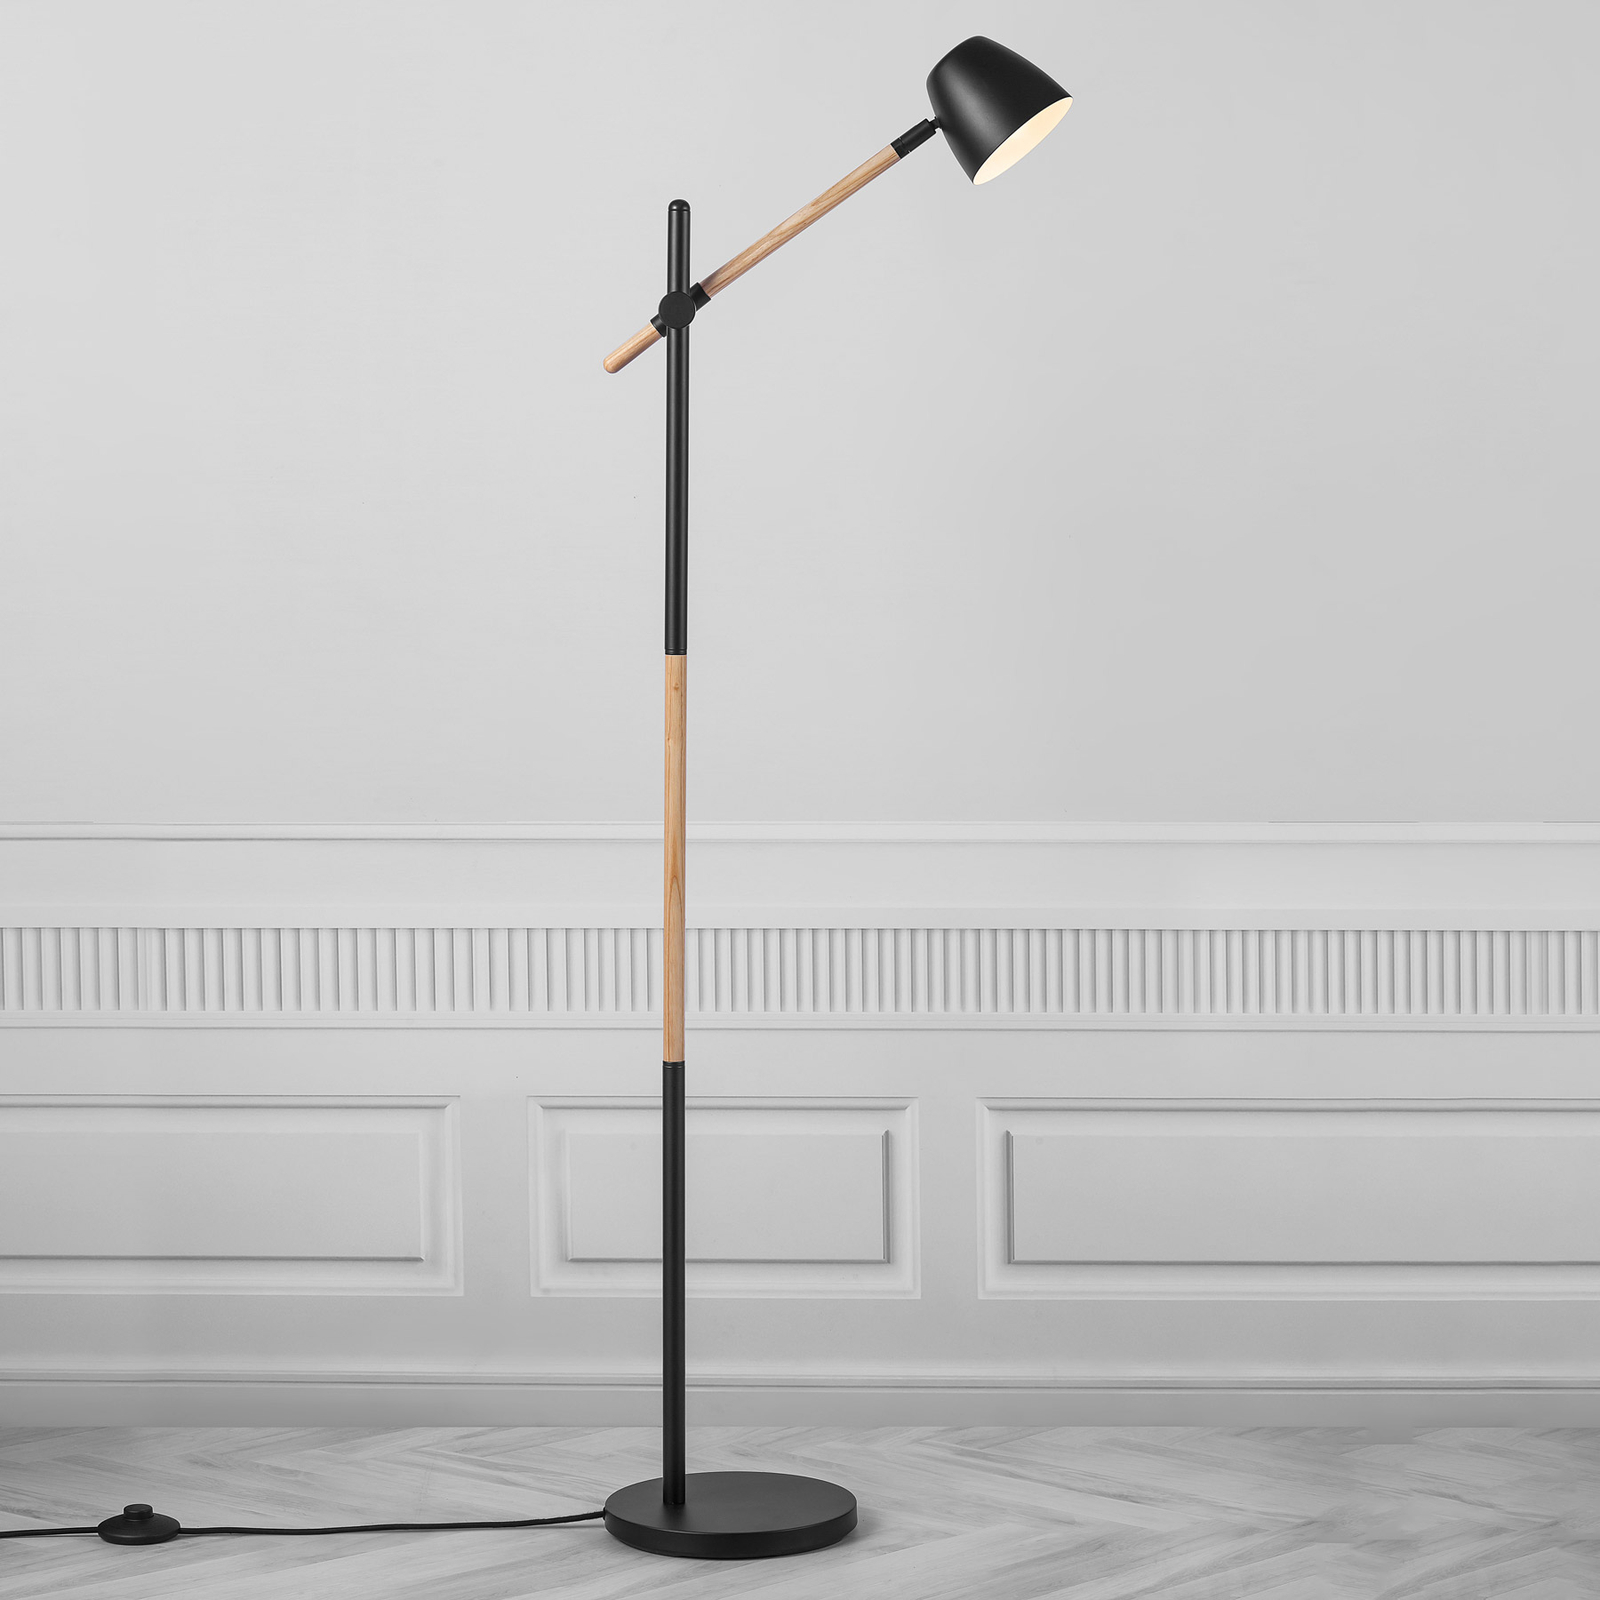 Theo floor lamp, made of ash wood